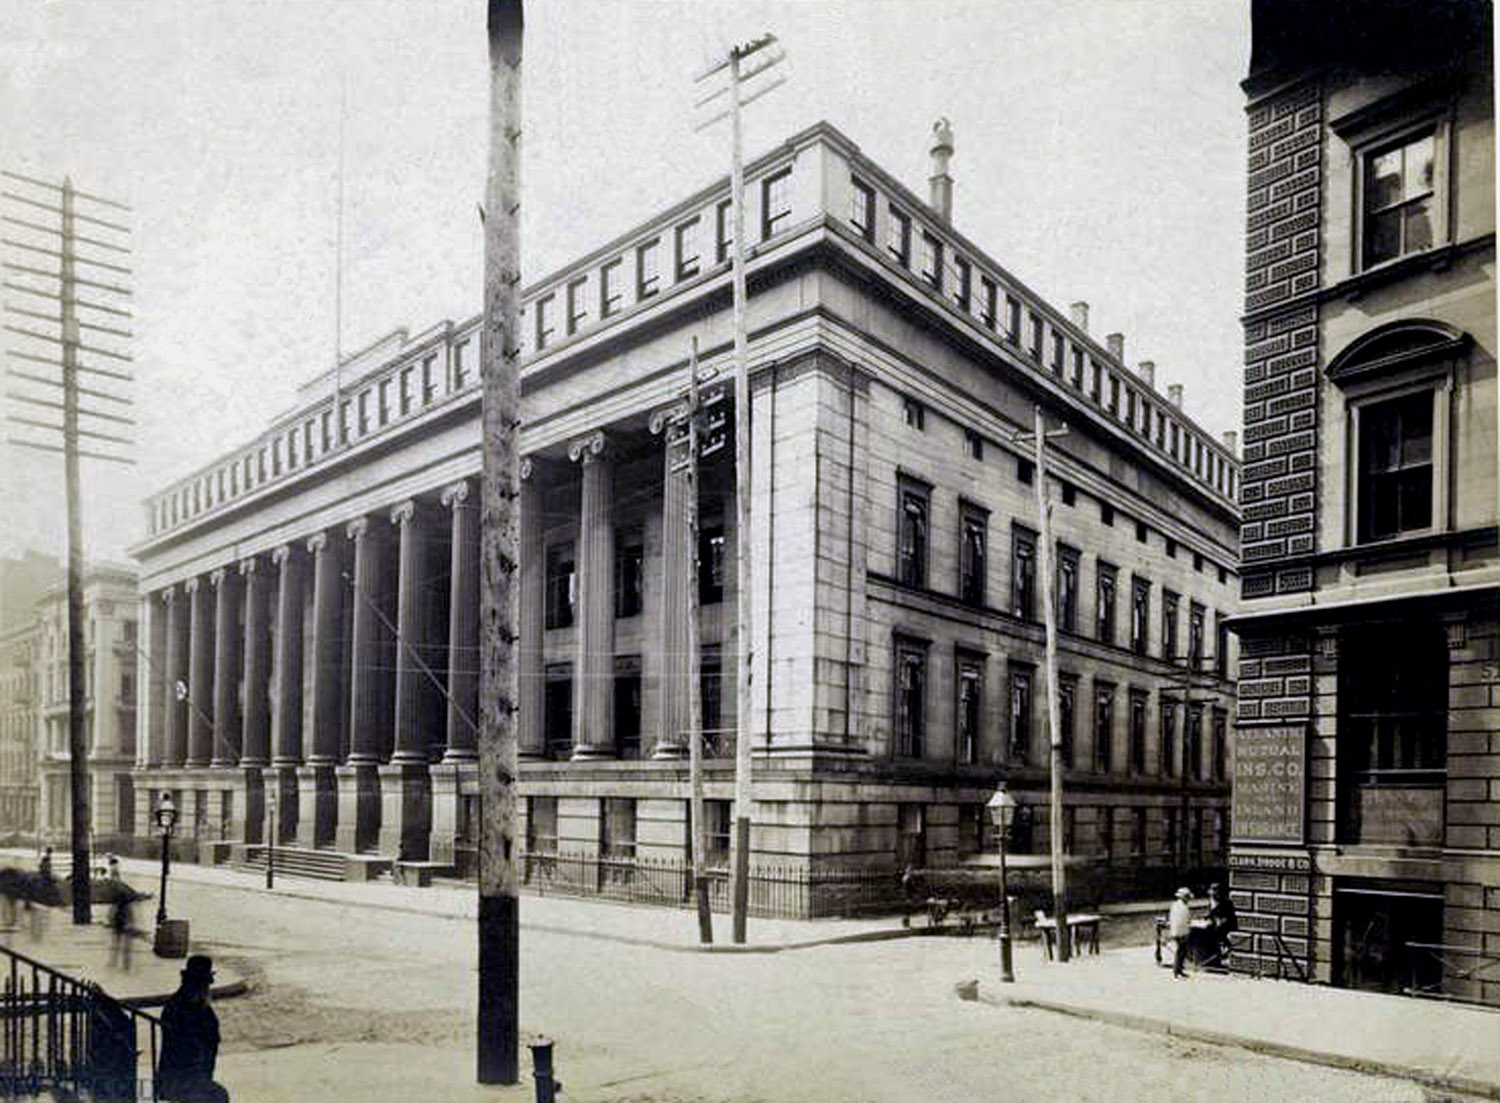 New York Custom House at 55 Wall Street.The offices of the collectors of customs were located in this building during the period Herman Melville worked as a customs inspector. Melville spent his working days as an inspector on the "outside" on various of the wharves that lined the North River (now the Hudson River). He and his partner(s) were responsible for renting their own "office" space to accommodate themselves and their equipment. When asked how he had managed to retain his job through many changes of administration, Melvill replied that he seldom made an appearance at the Wall Street customhouse -- in other words, the politicians forgot about the quiet, withdrawn older man toiling dutifully under adverse conditions that eventually broke his health and mental stability.